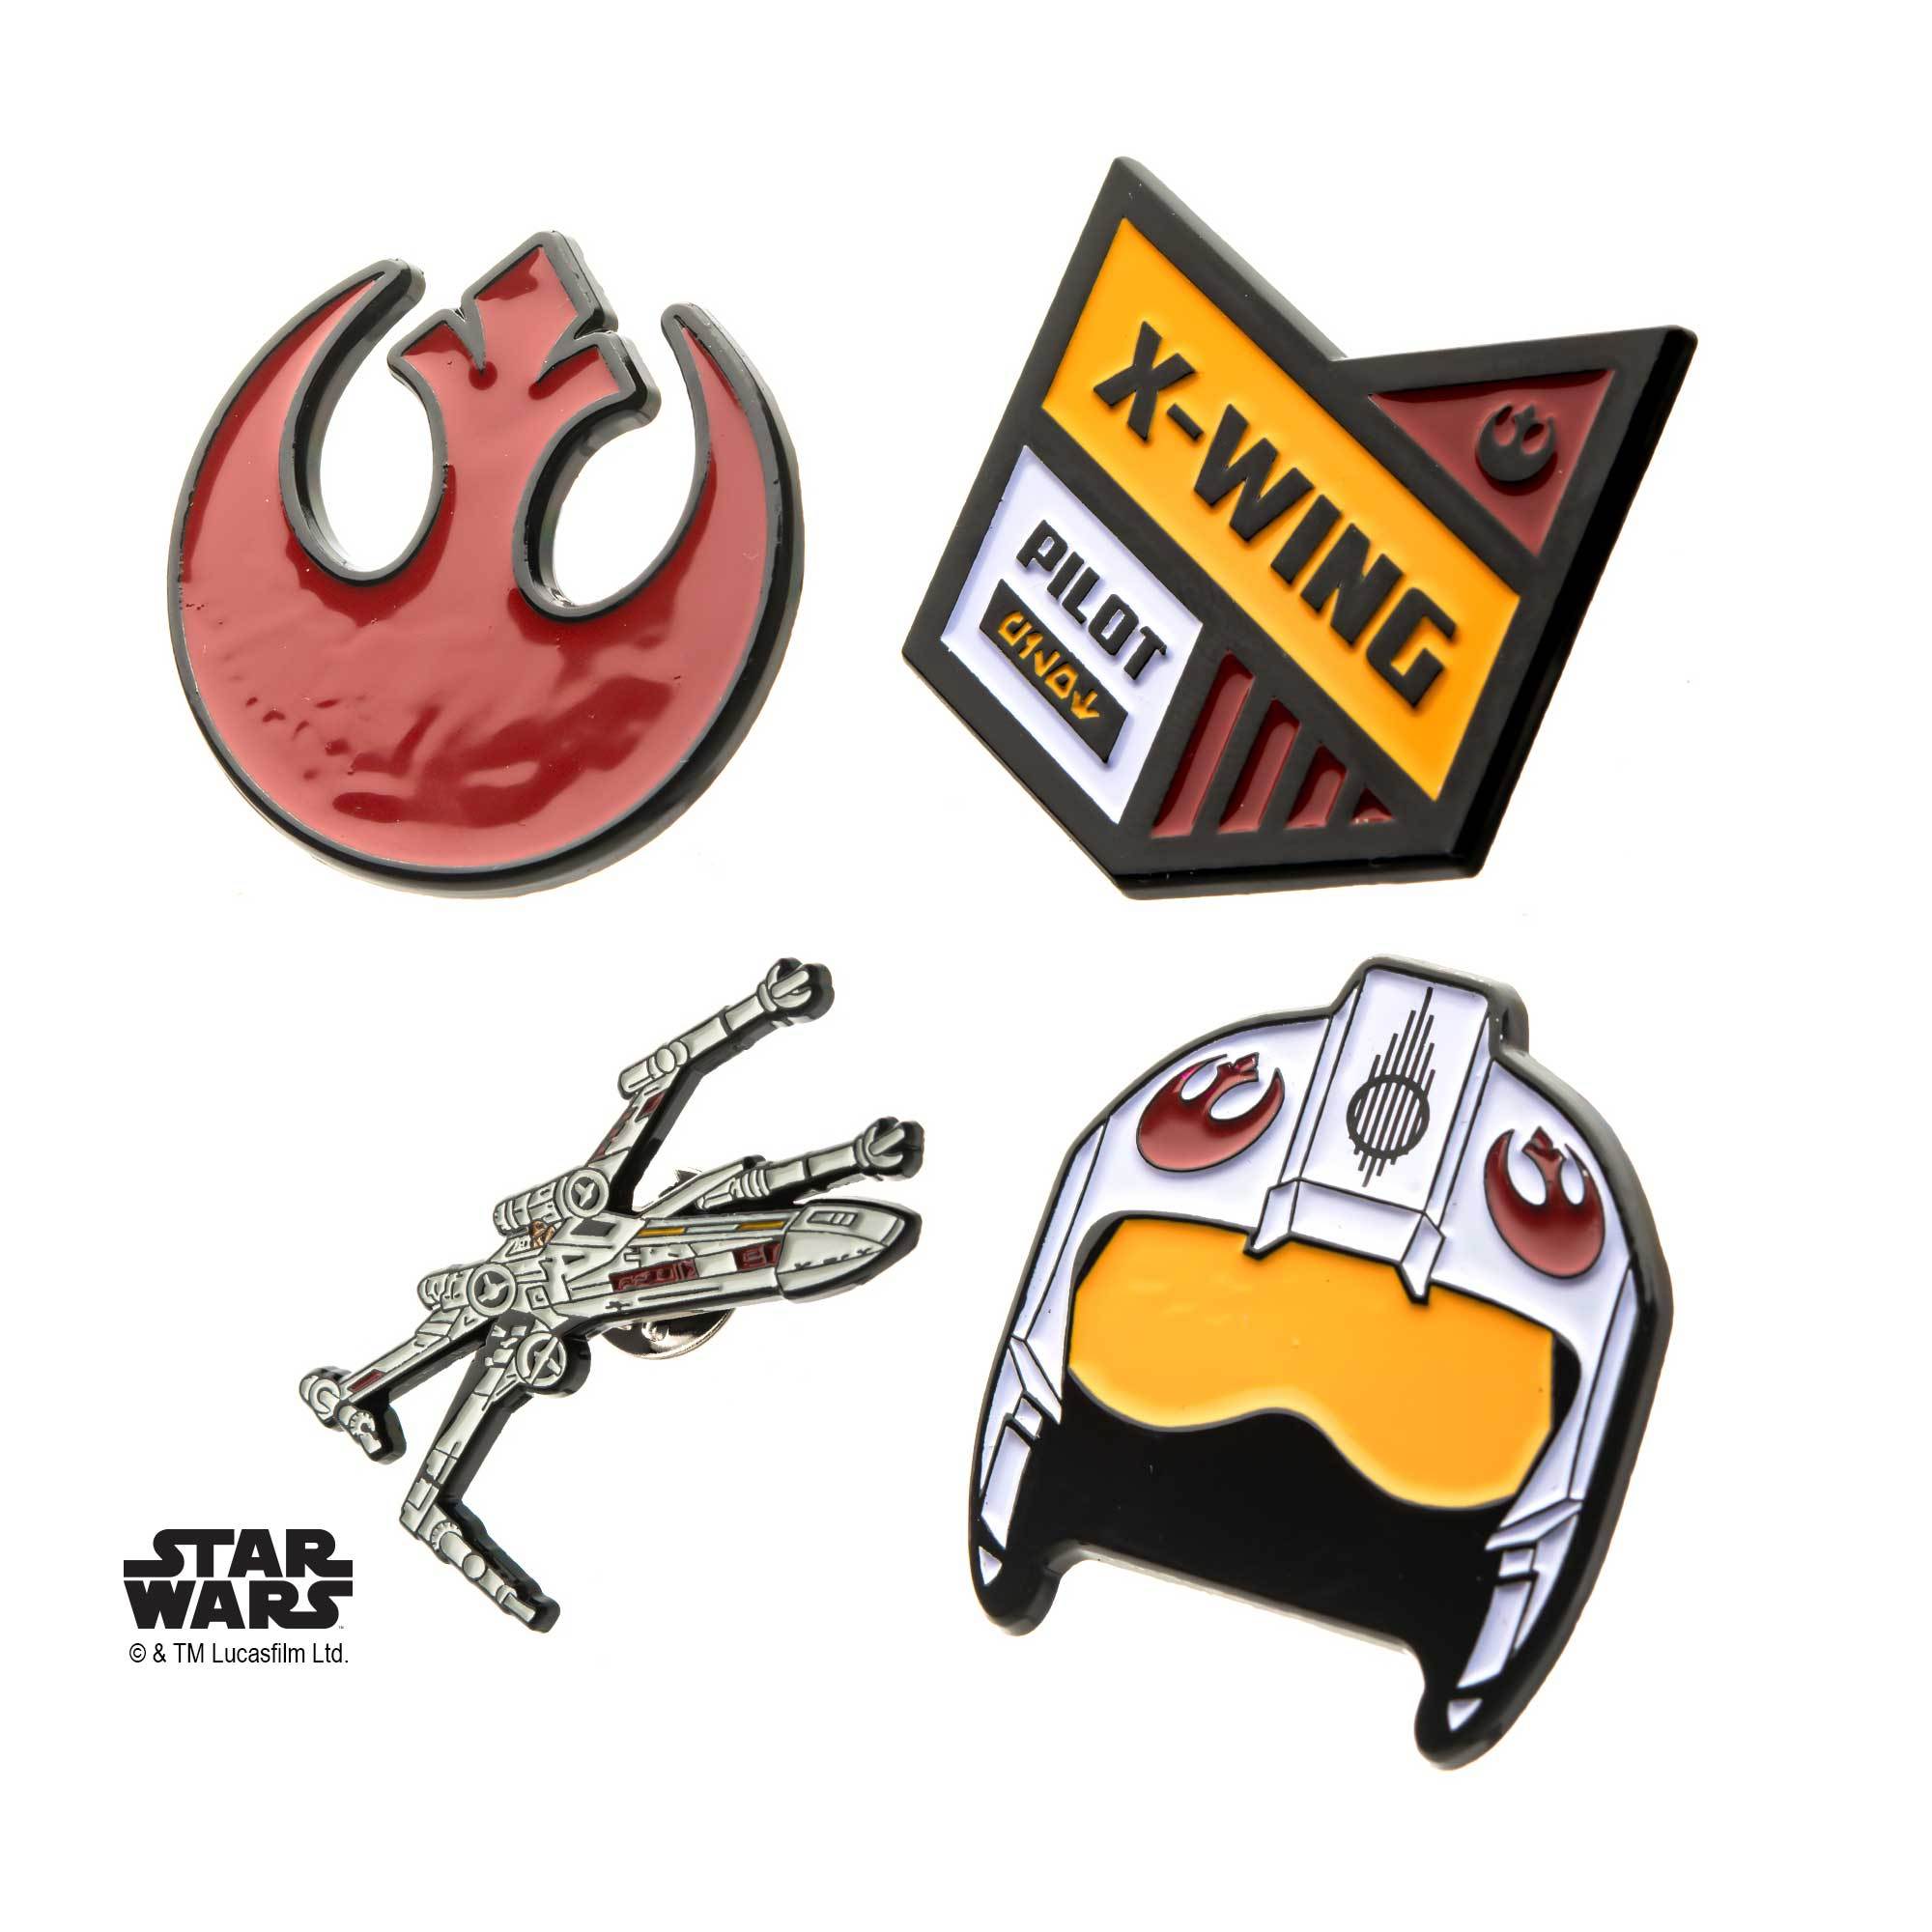 Star Wars Rebel Alliance Symbol and X- Wing Fighter Lapel Pin Set